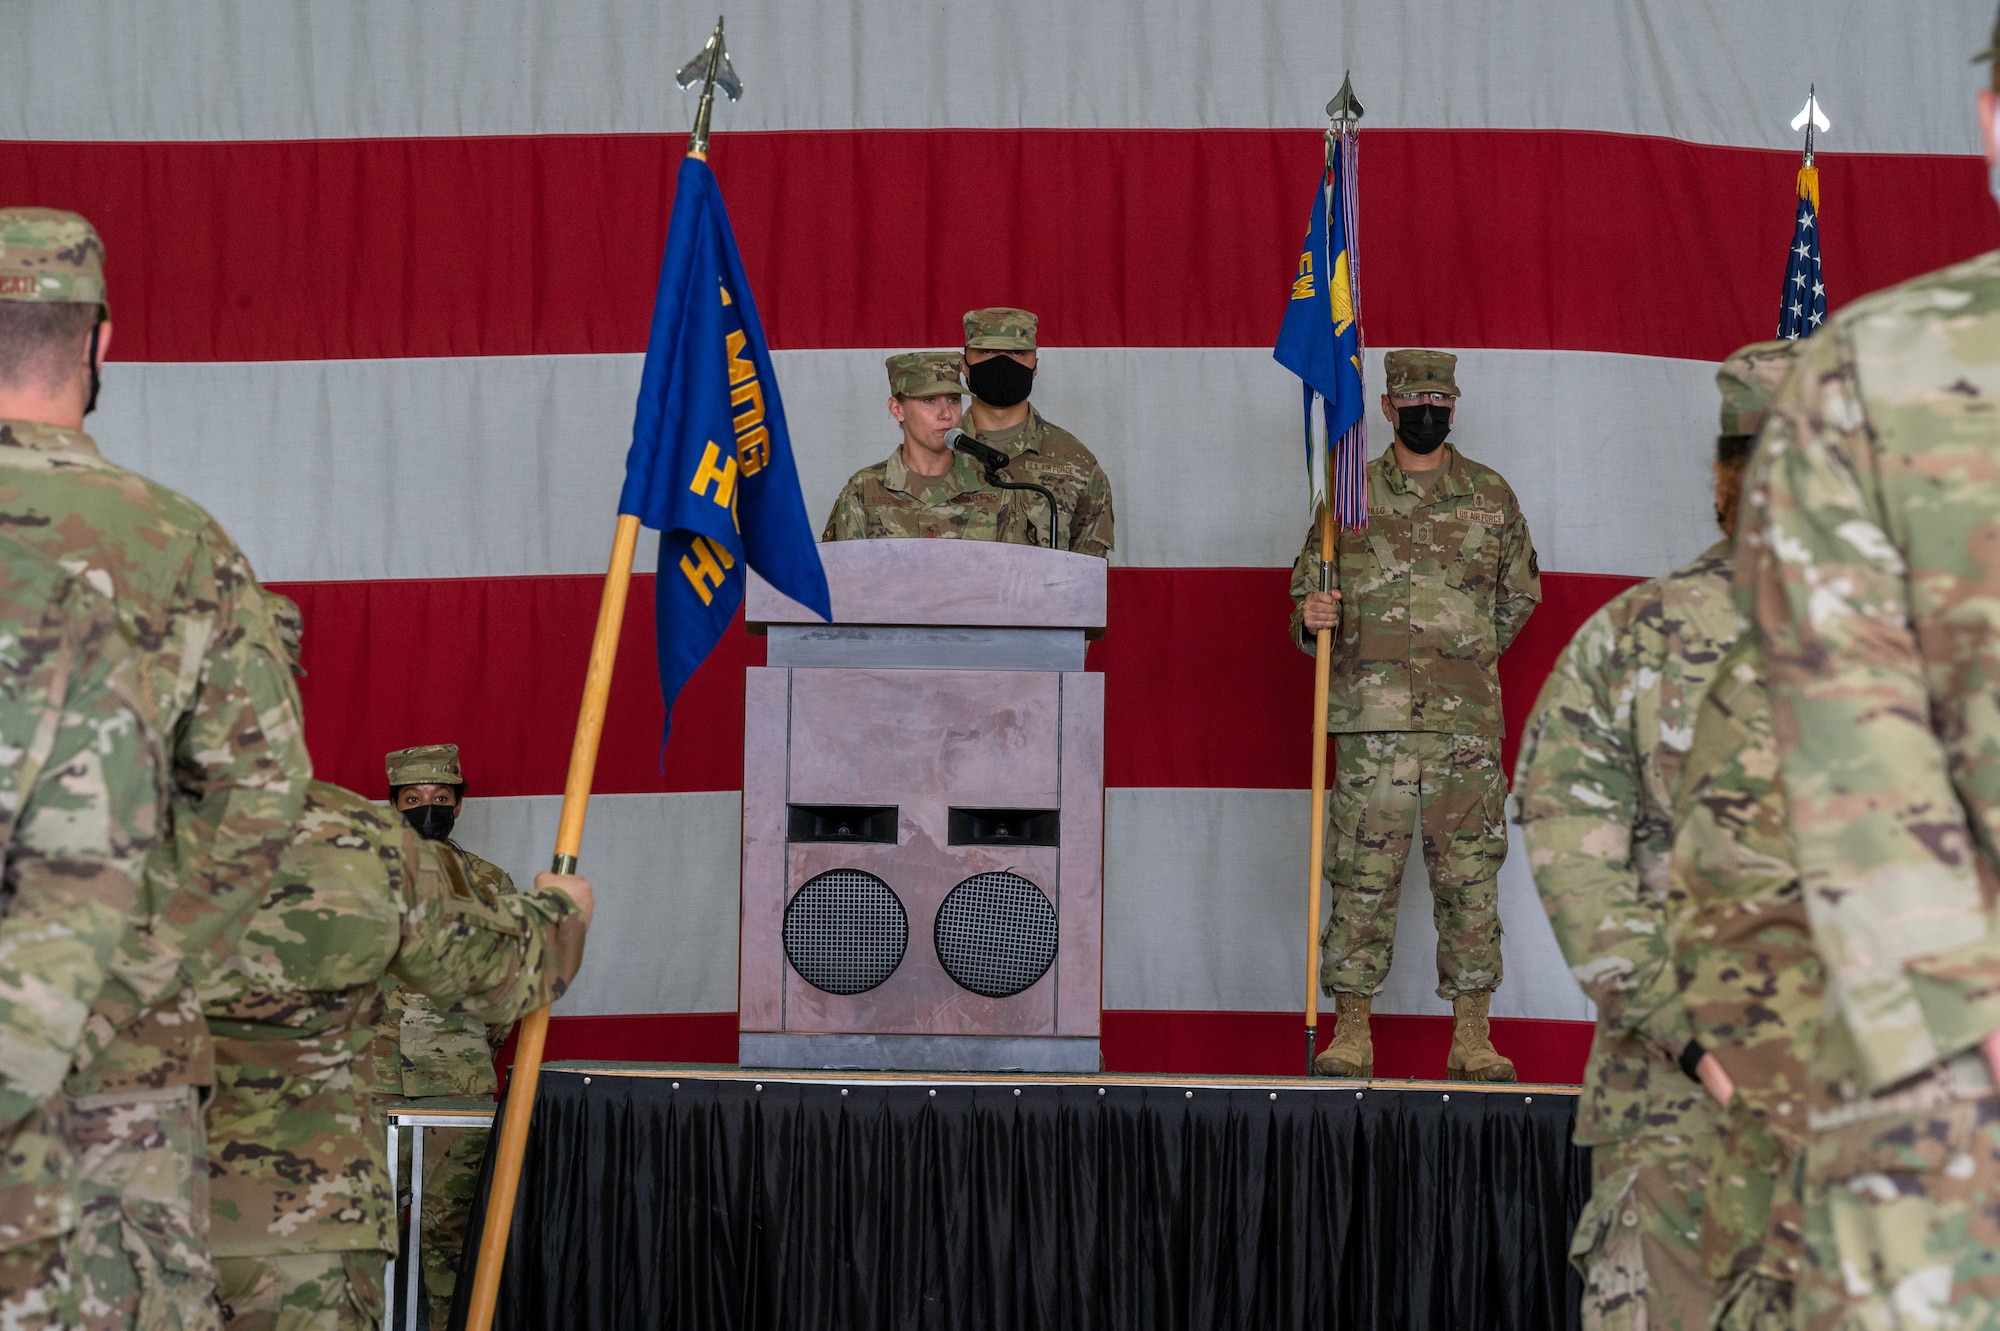 Col. Jennifer Vecchione, 51st Medical Group commander, delivers remarks to her squadron during the change of command ceremony at Osan Air Base, Republic of Korea, July 12, 2021. The ceremonial passing of the guidon to Vecchione marks the official beginning of her command of the 51st MDG. (U.S. Air Force photo by Tech. Sgt. Nicholas Alder)